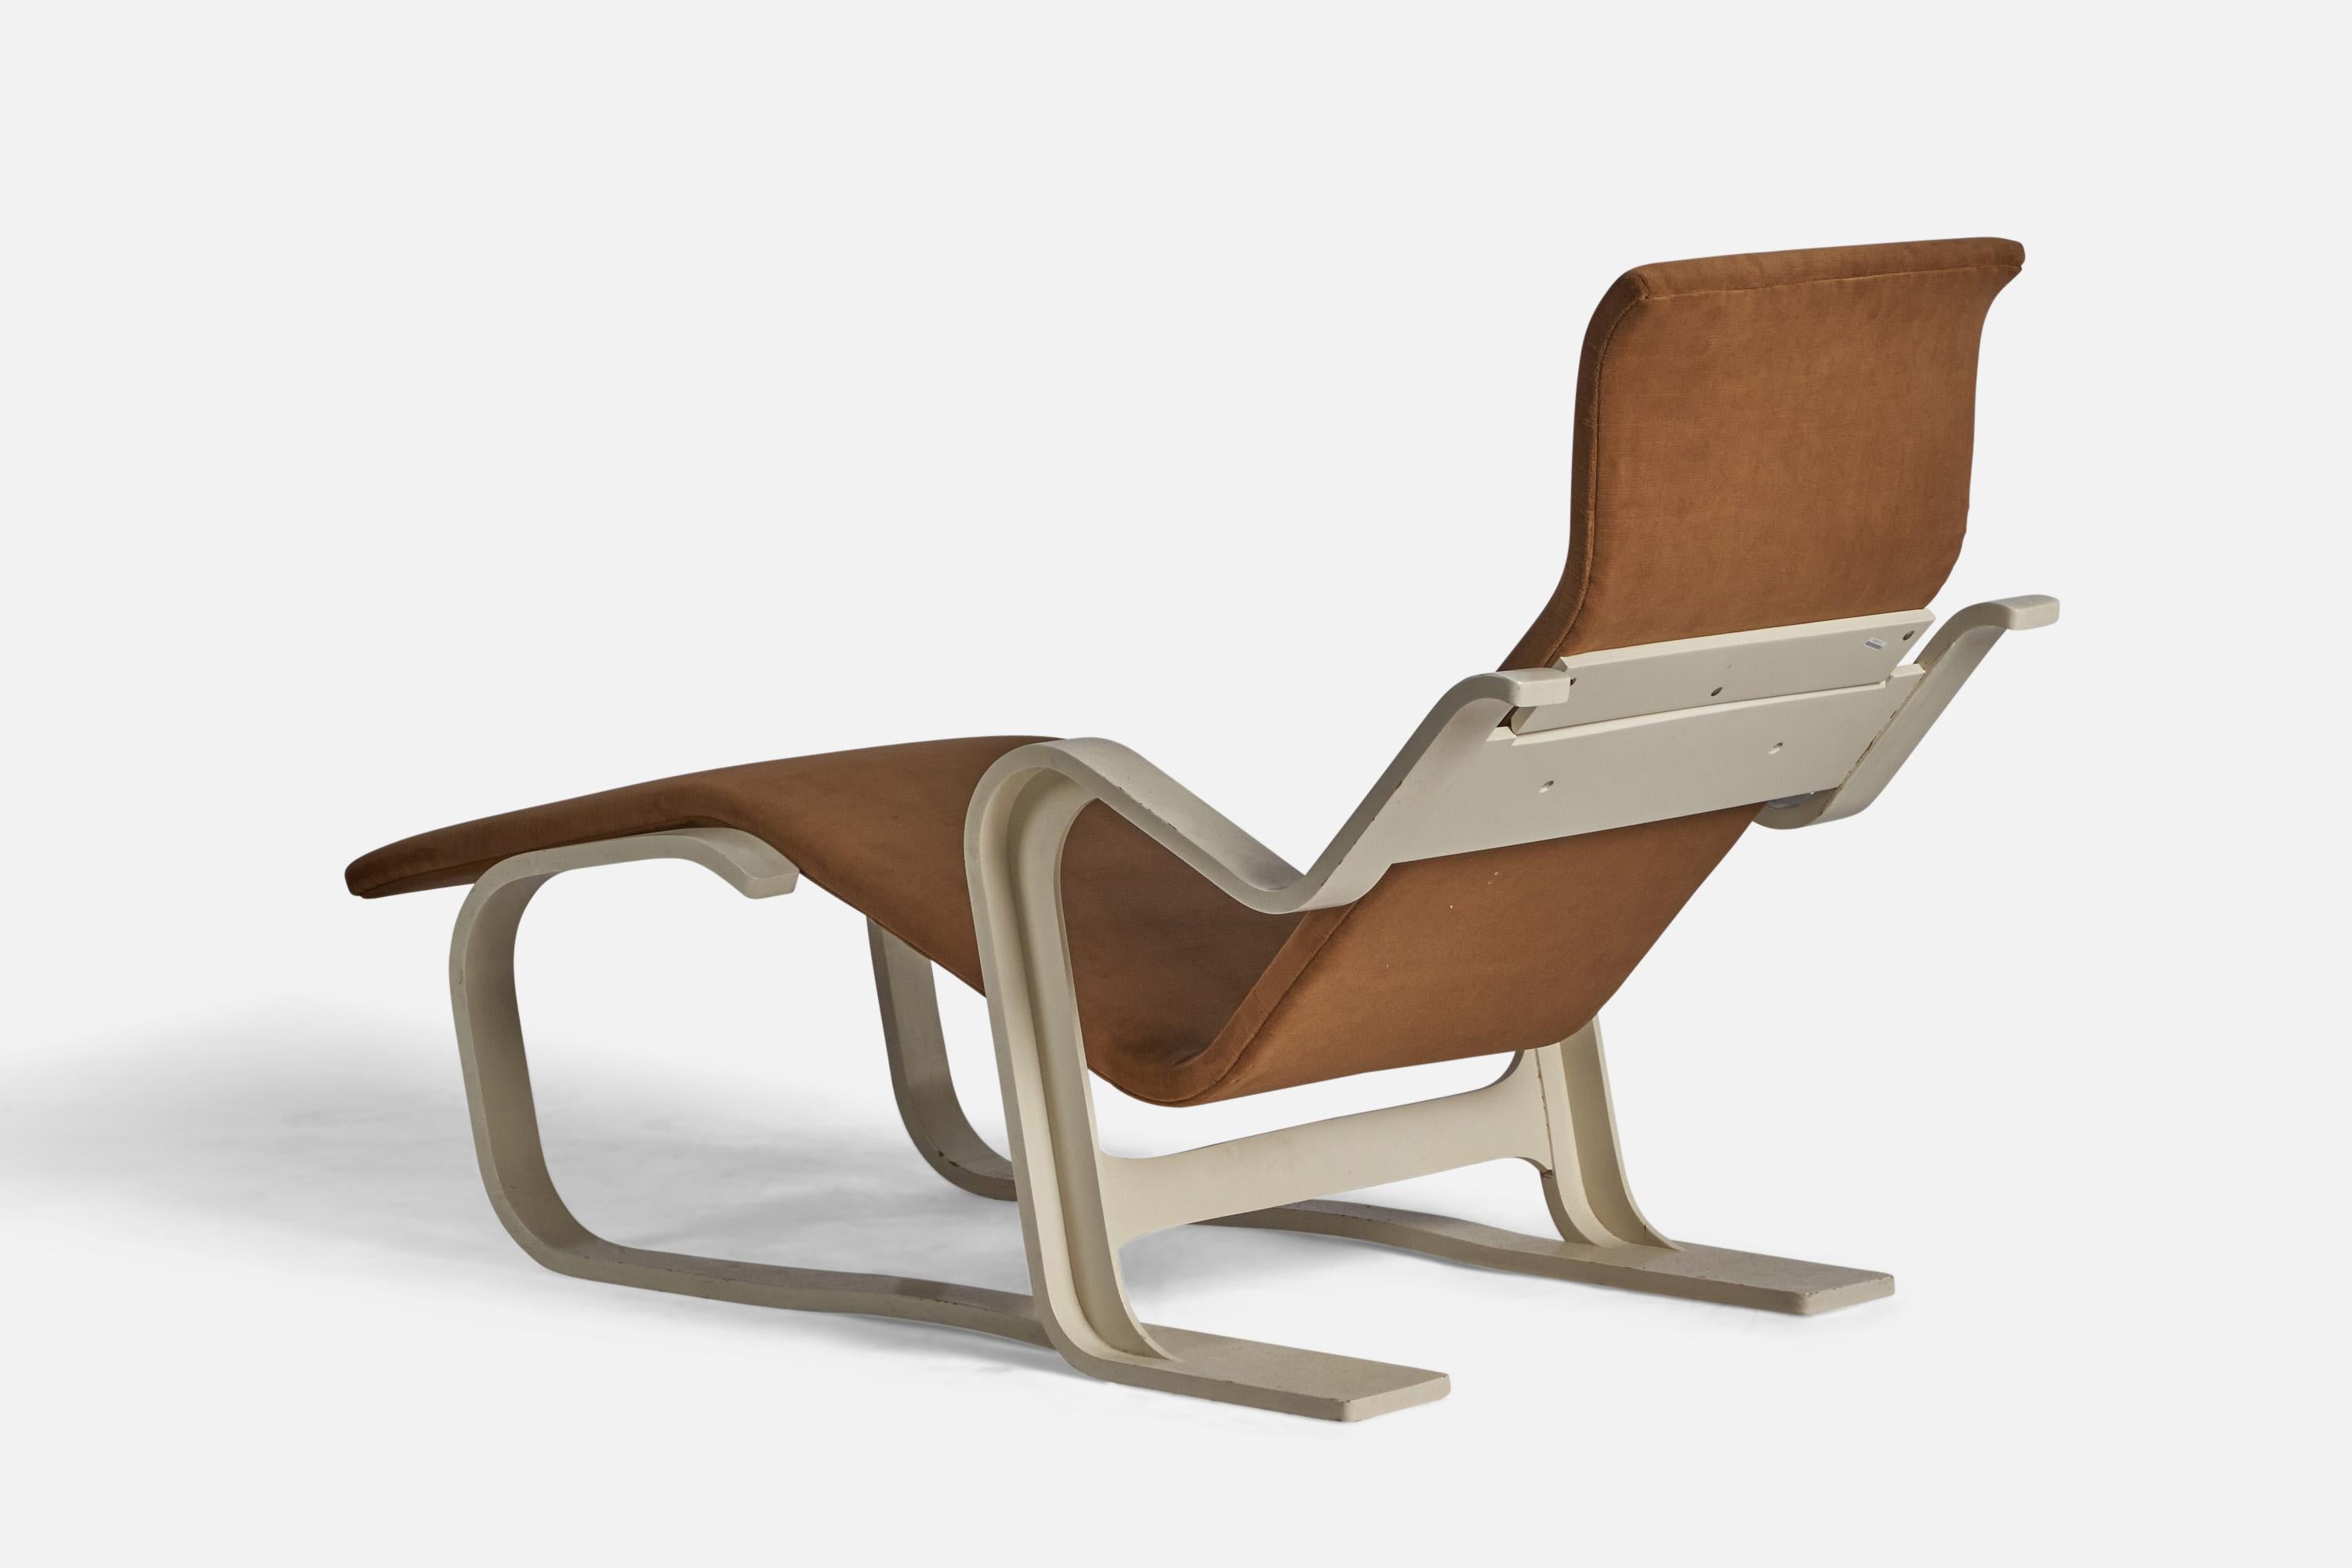 Mid-20th Century Marcel Breuer, Chaise Longue, Wood, Fabric, USA, 1960s For Sale